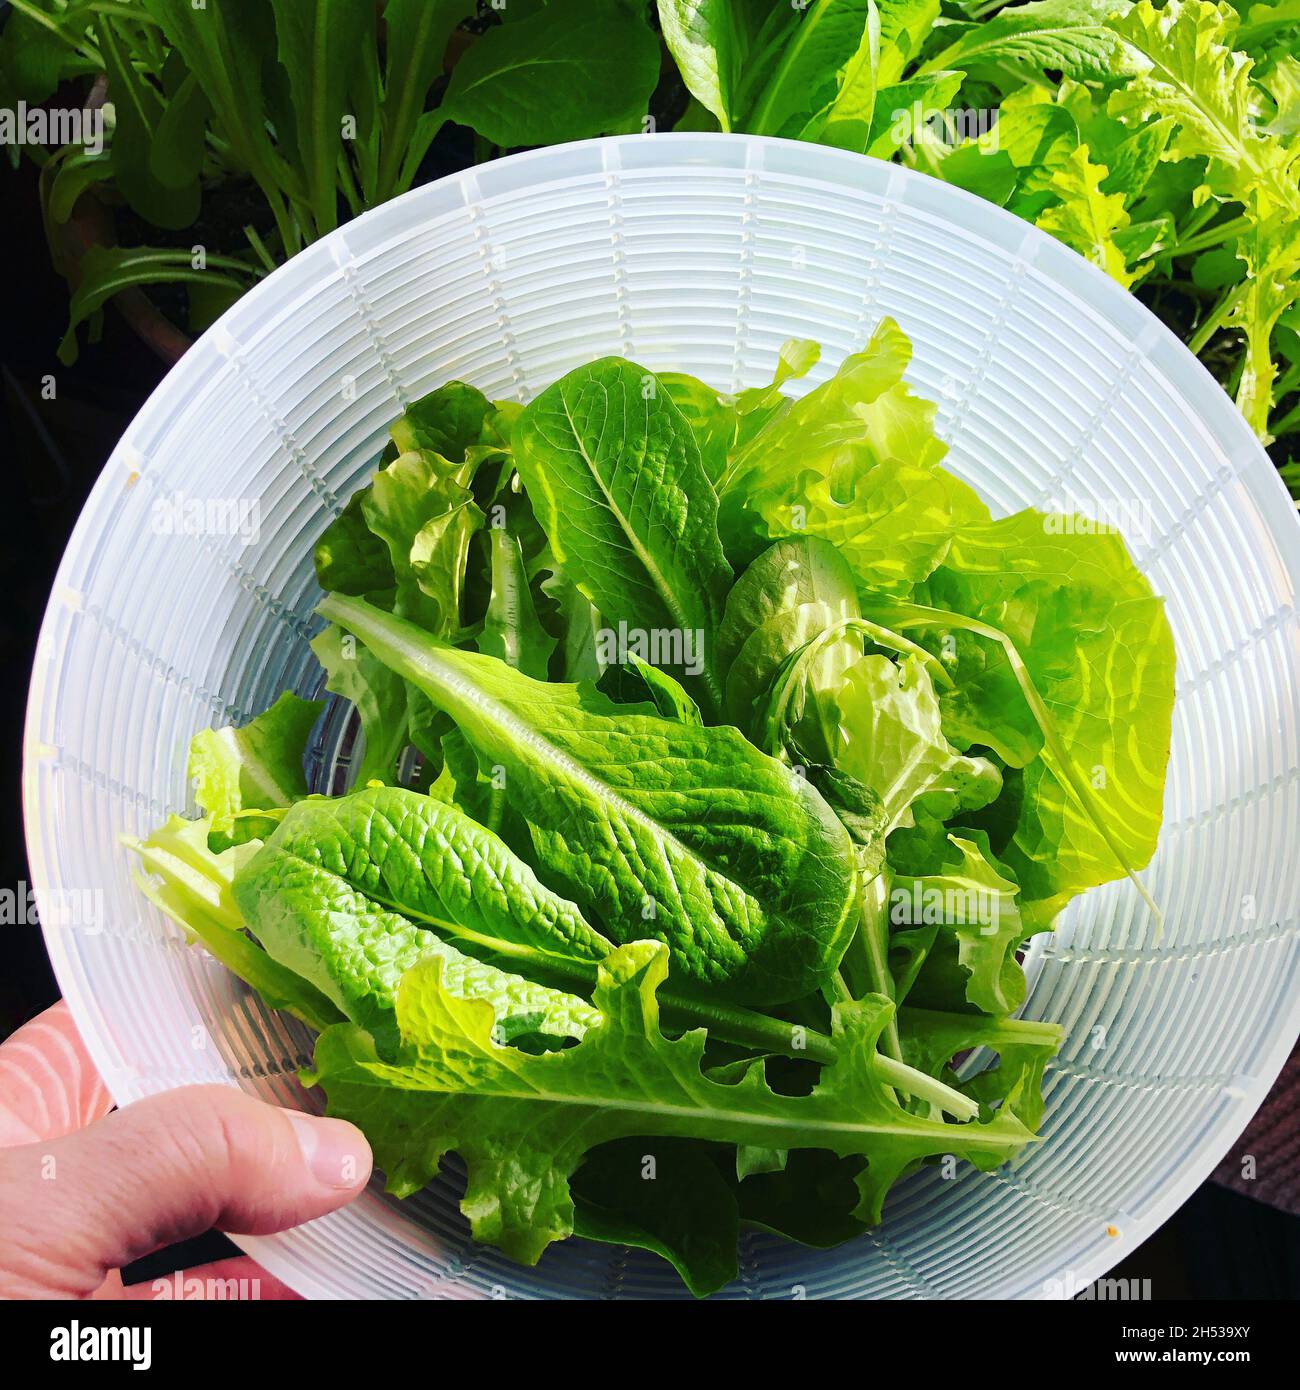 Closeup of freshly picked salad leaves in a container Stock Photo